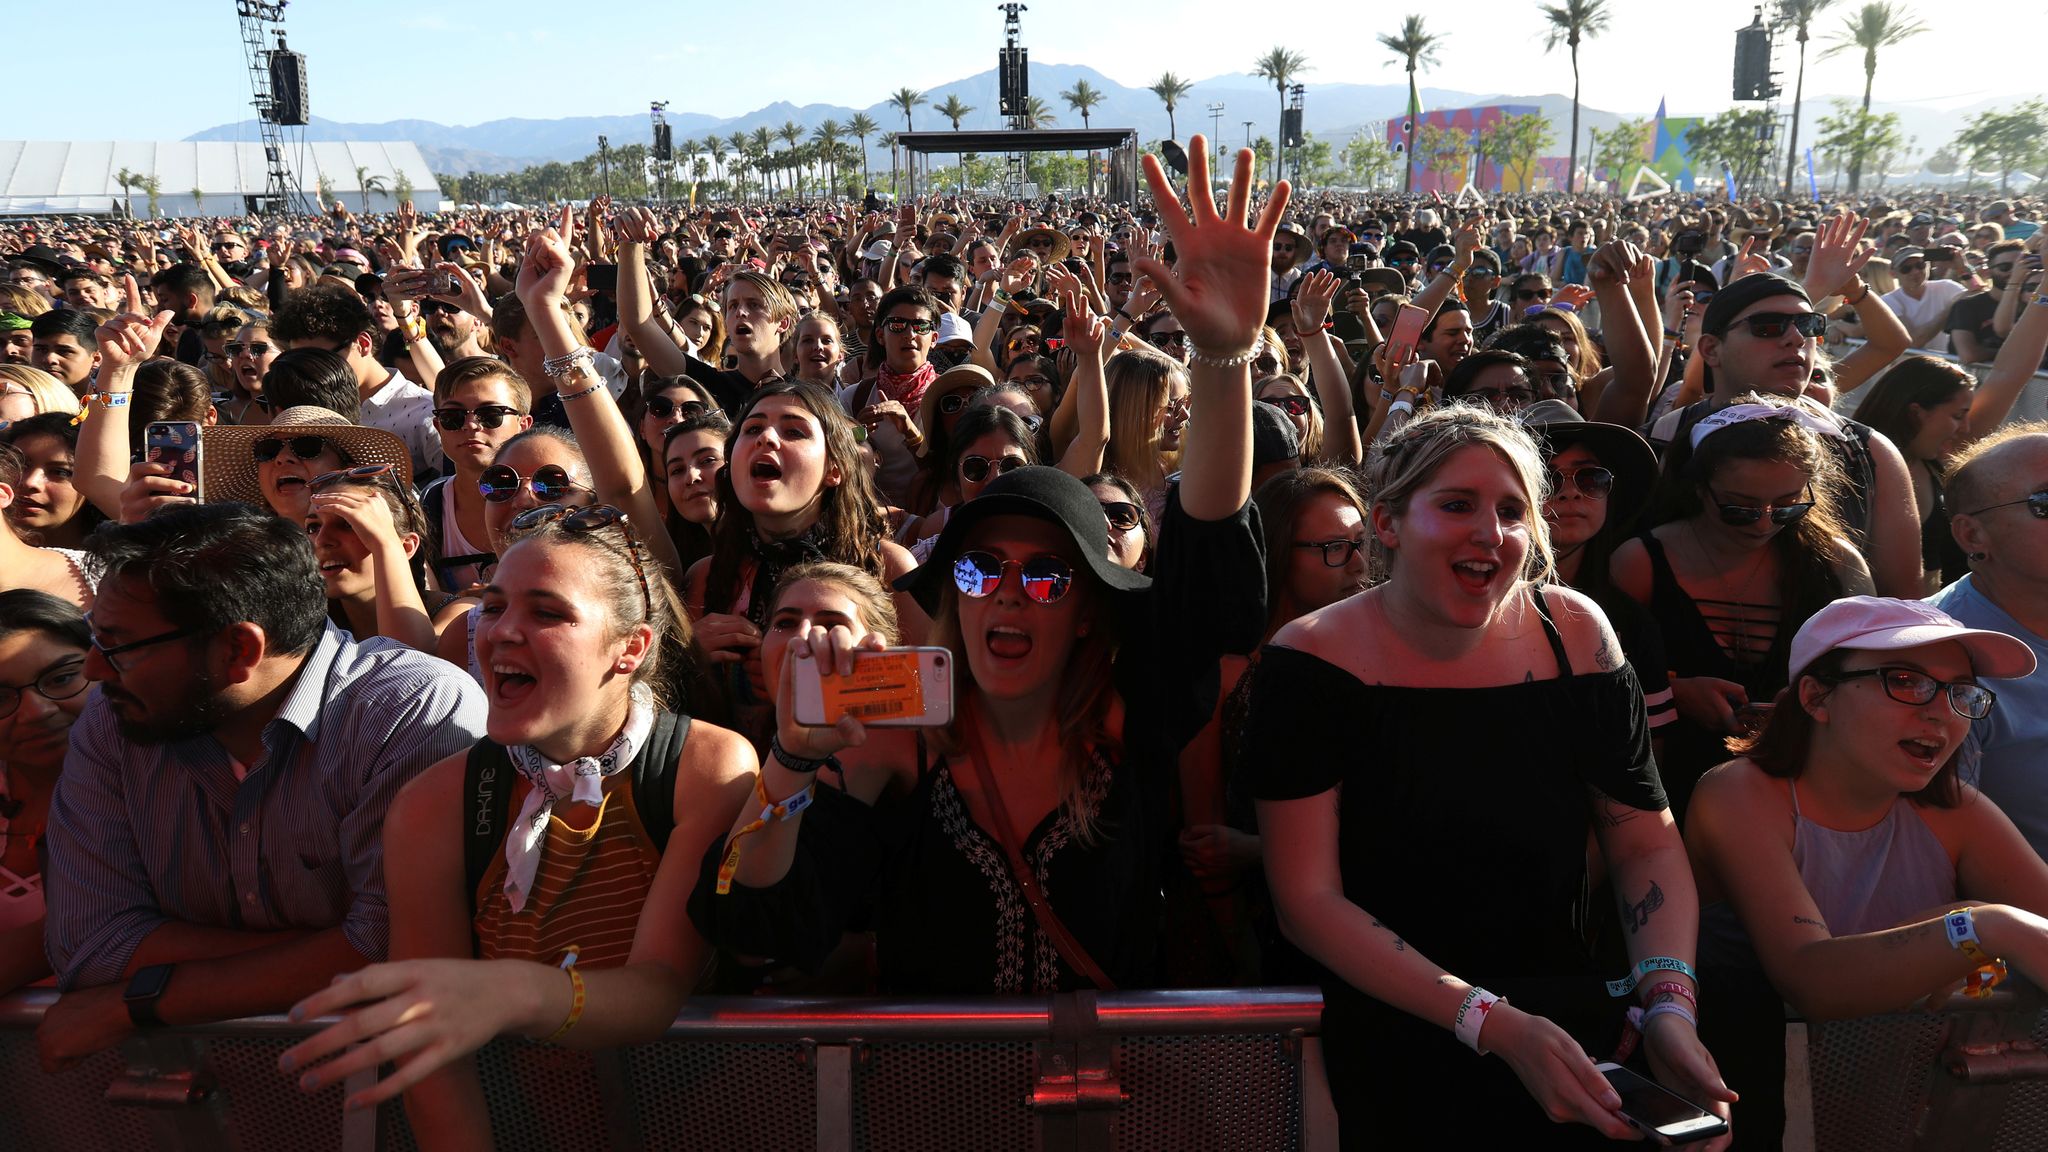 Coachella and Stagecoach dates 2022 Festivals to return after COVID19